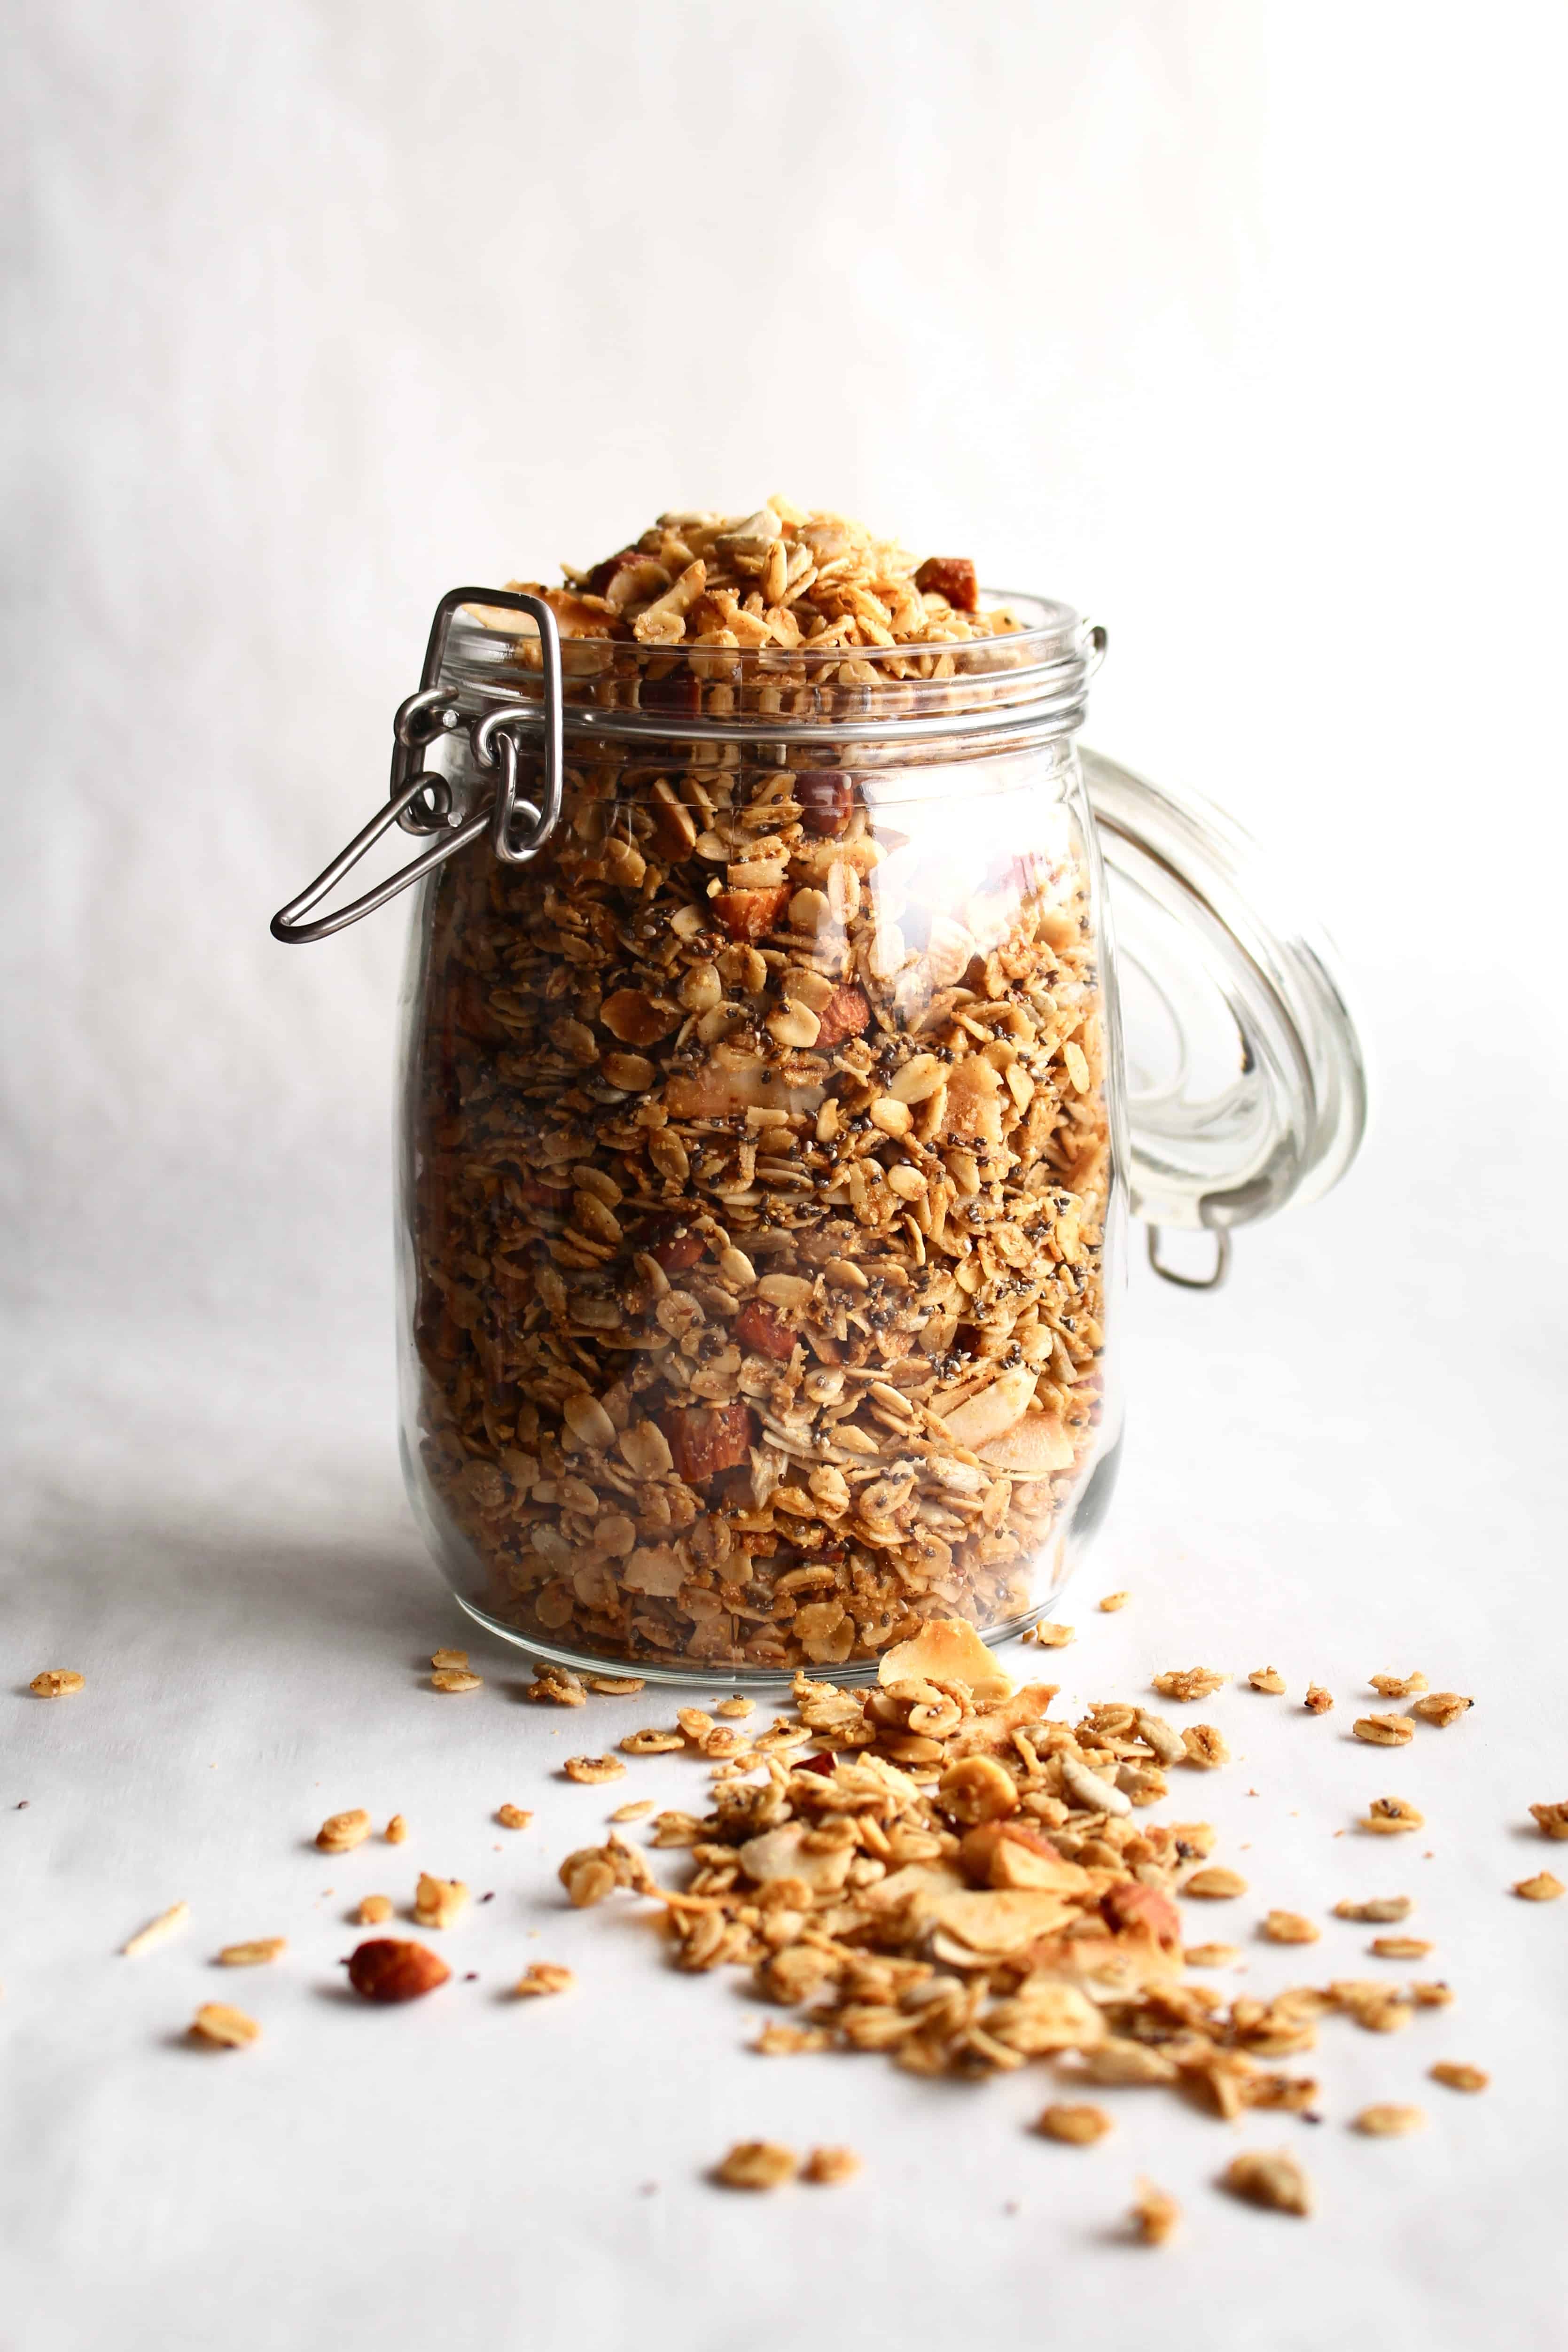 A glass jar of gluten-free granola on a white surface, with some granola spilled in front of the jar.